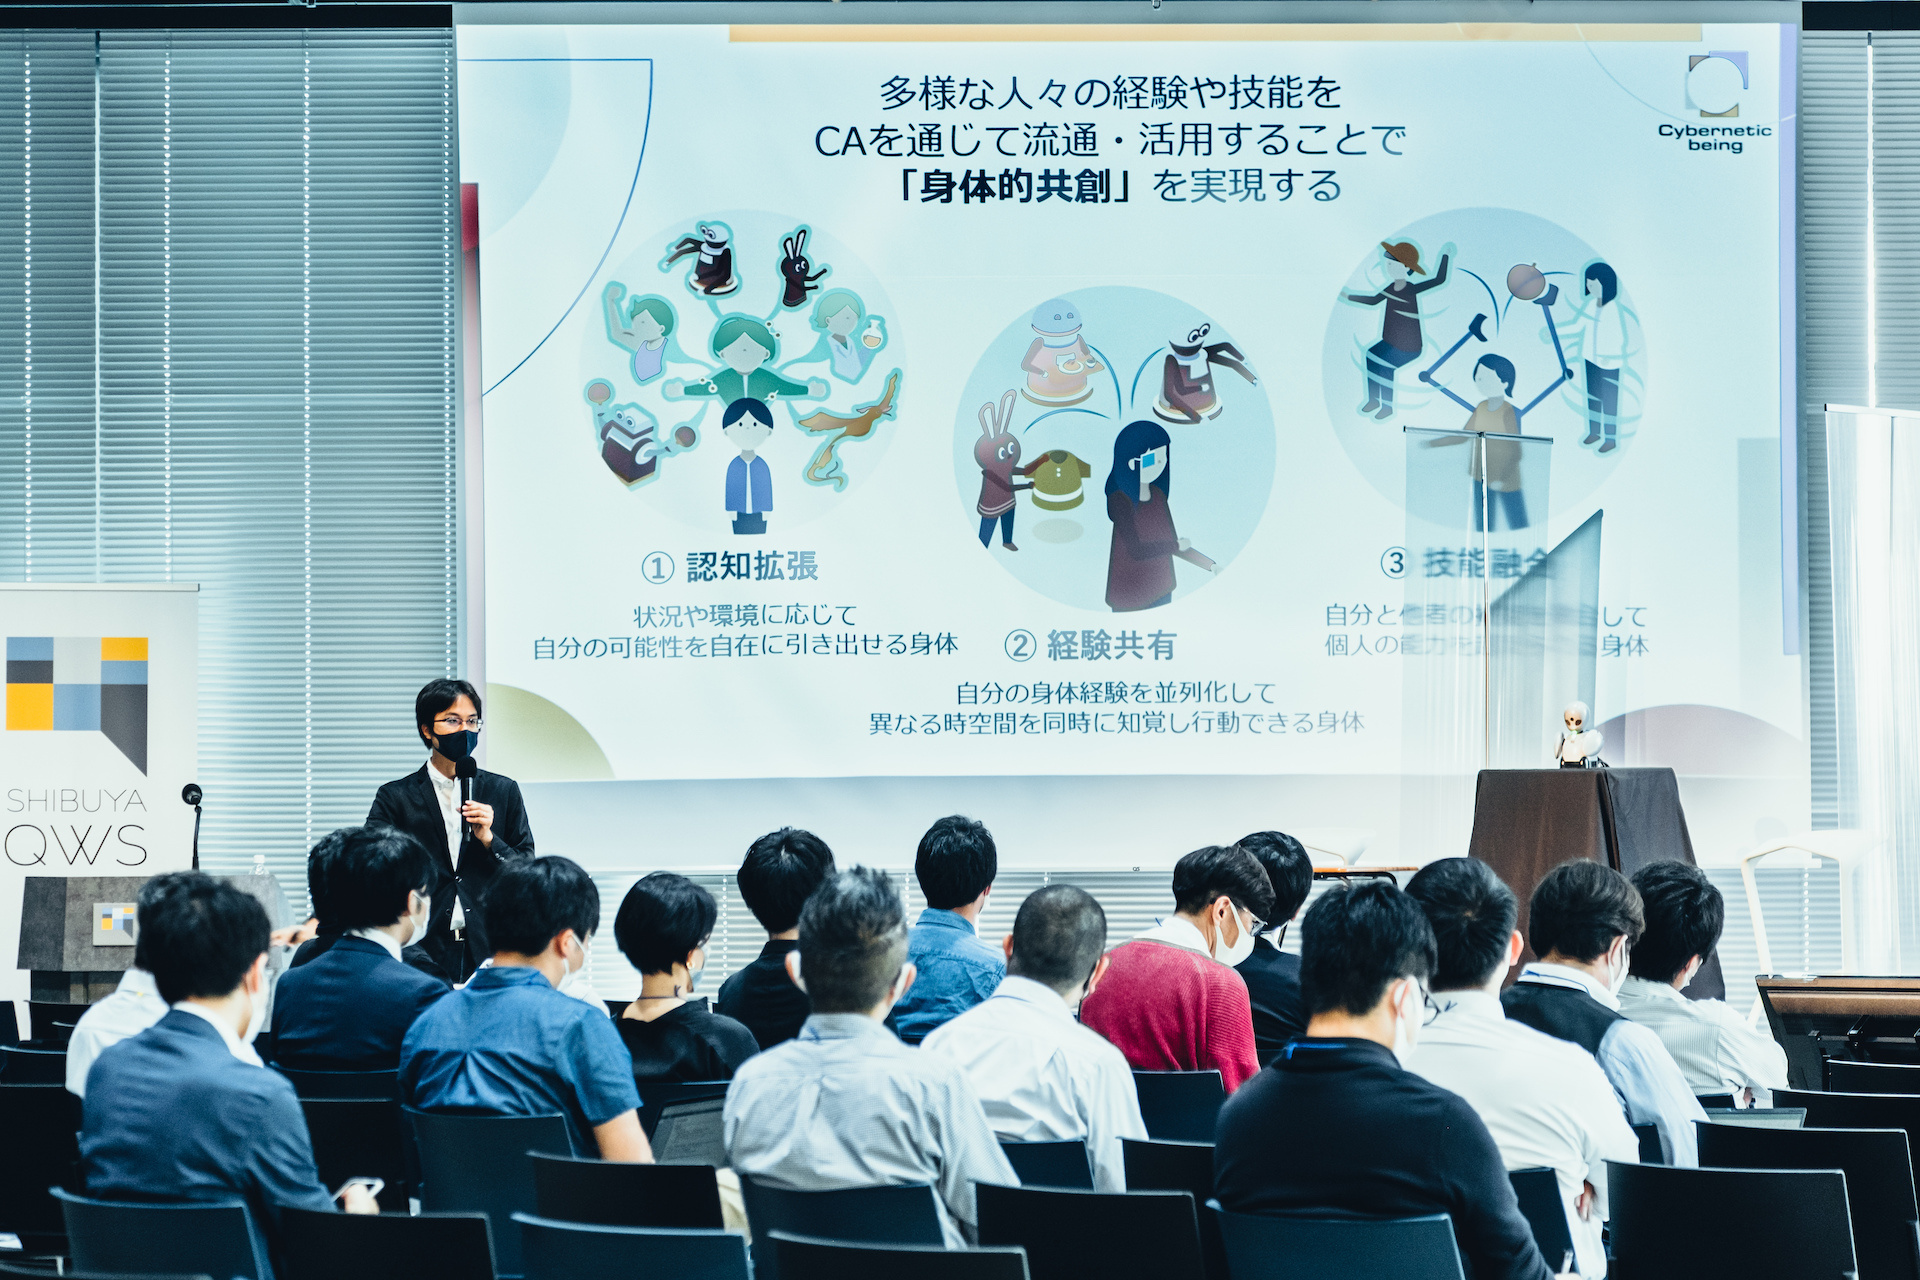 『Cybernetic being symposium ―身体的共創で生み出すサイバネティック・アバター社会の未来―』レポート①　“Project Cybernetic being”が目指す未来社会